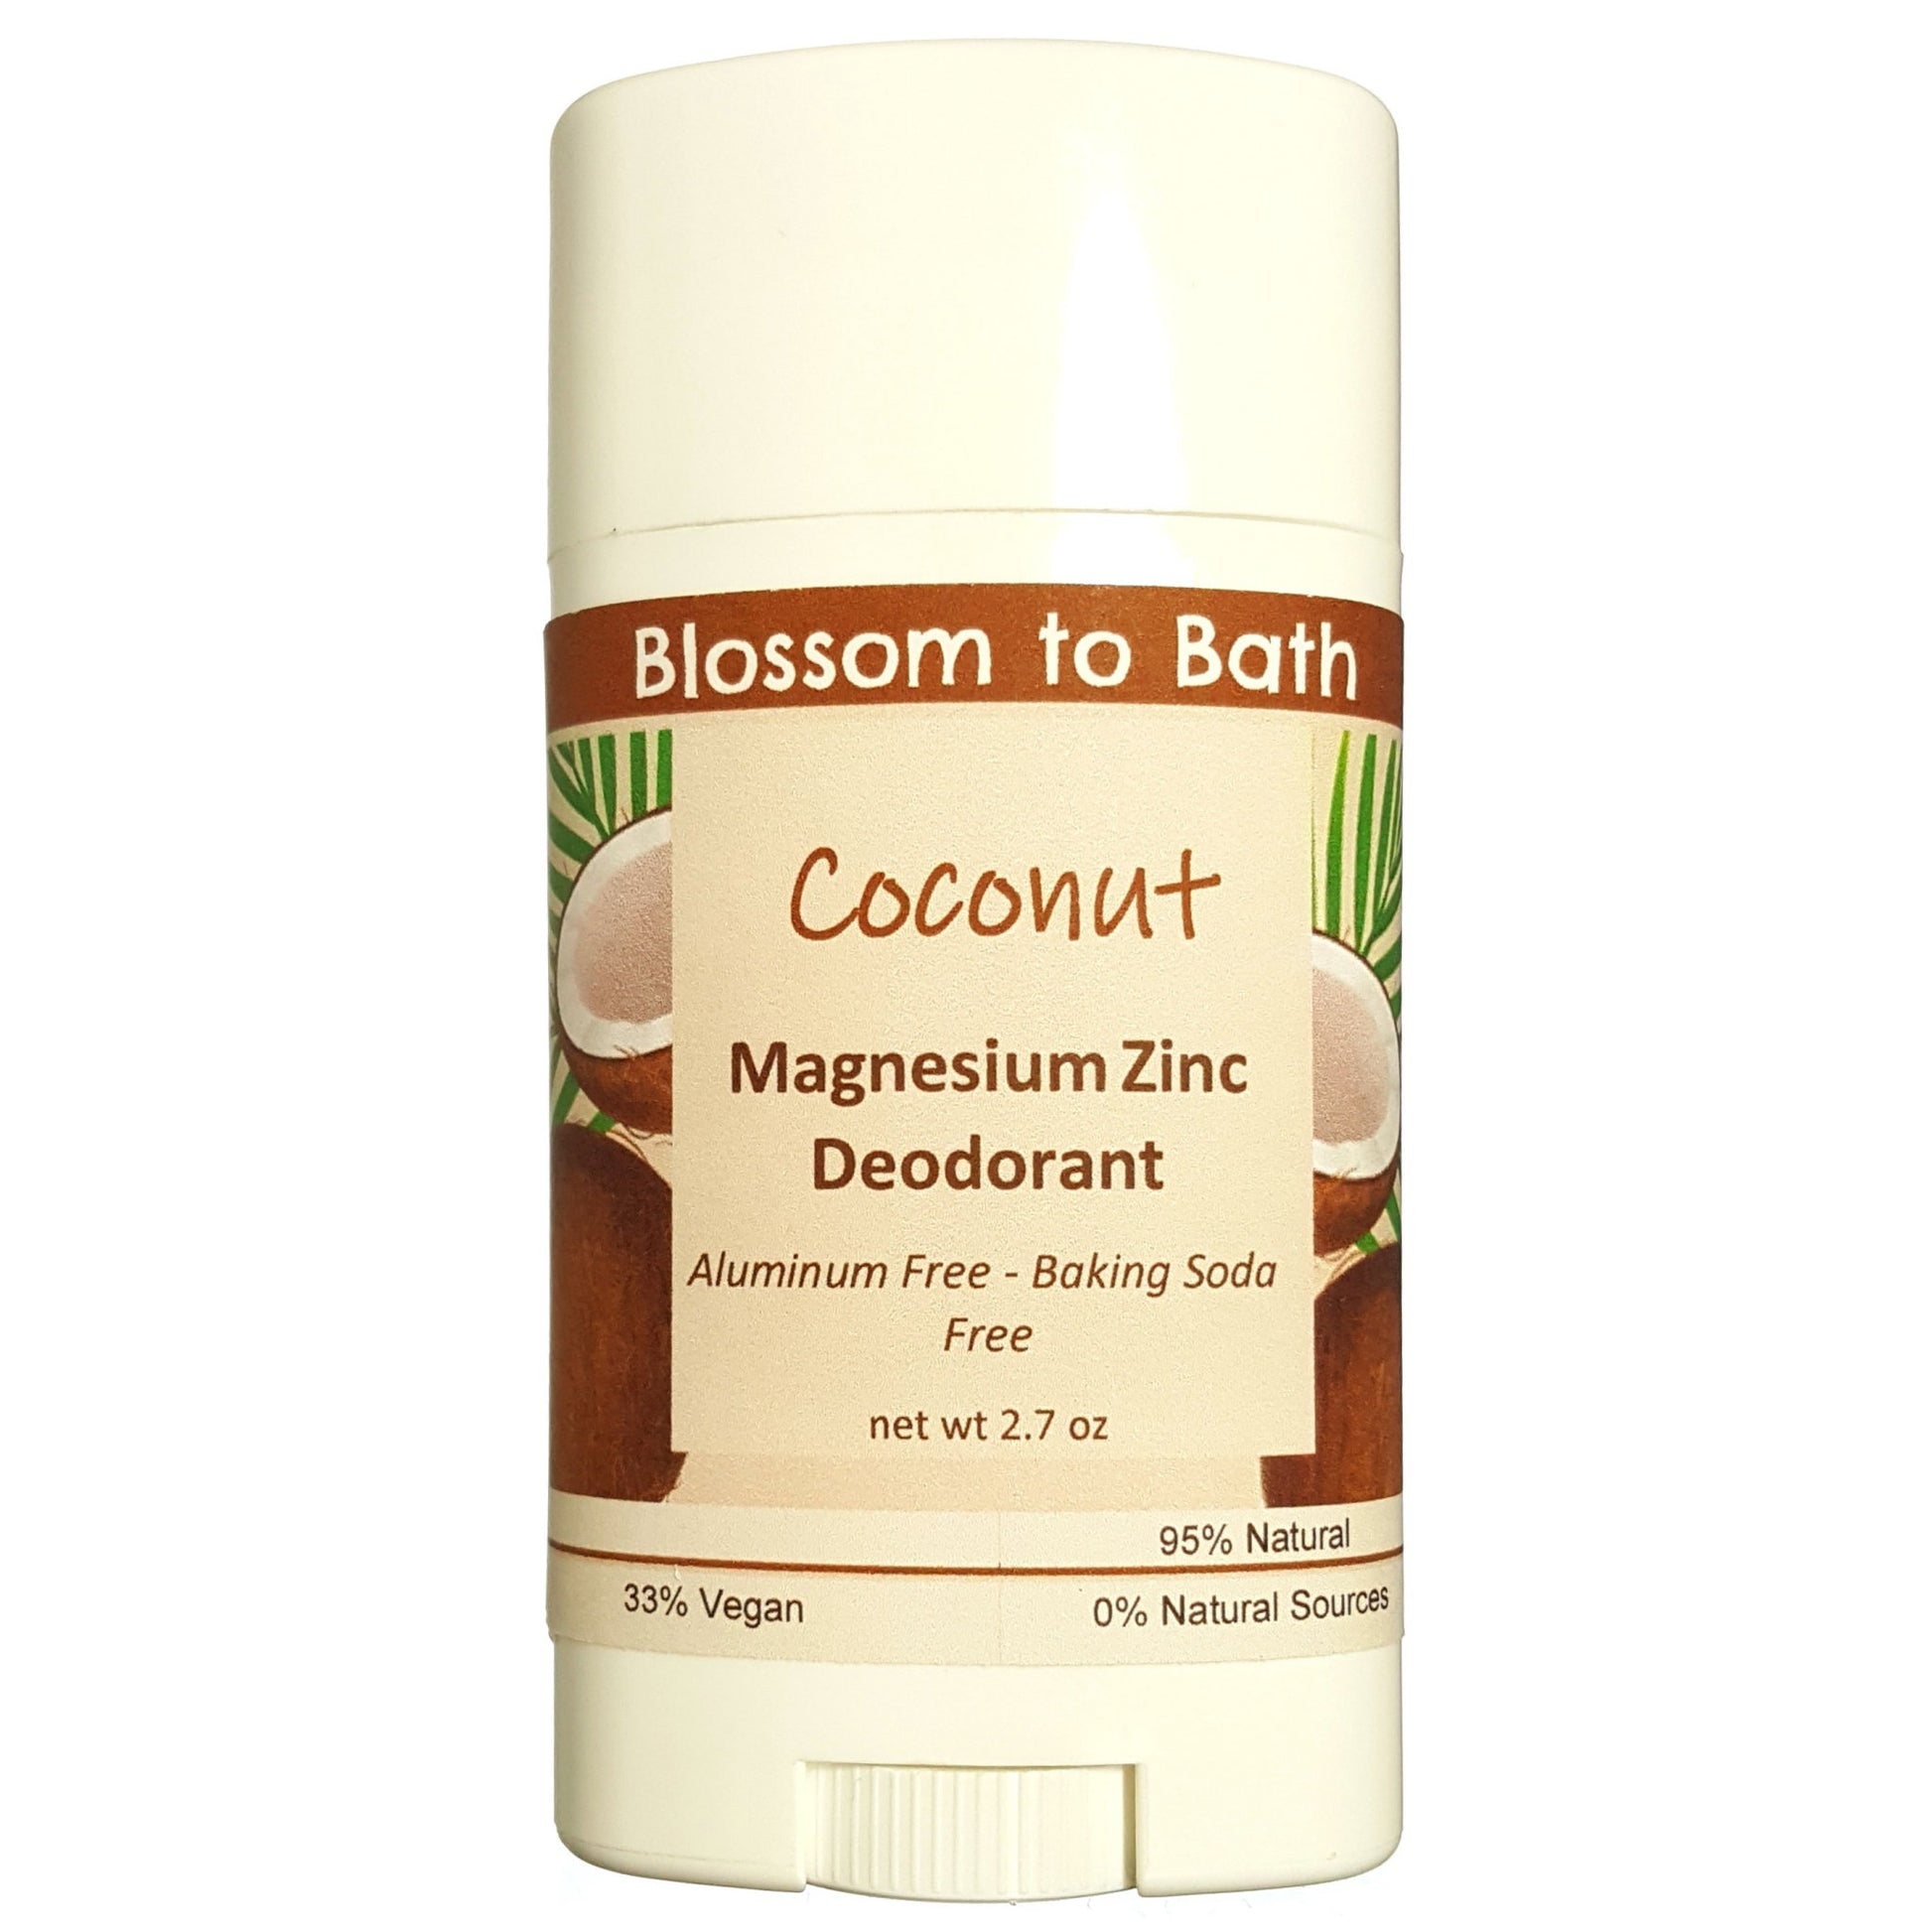 Buy Blossom to Bath Coconut Magnesium Zinc Deodorant from Flowersong Soap Studio.  Long lasting protection made from organic botanicals and butters, made without baking soda, tested in the Arizona heat  Bold coconut swirled with tropical fruit.